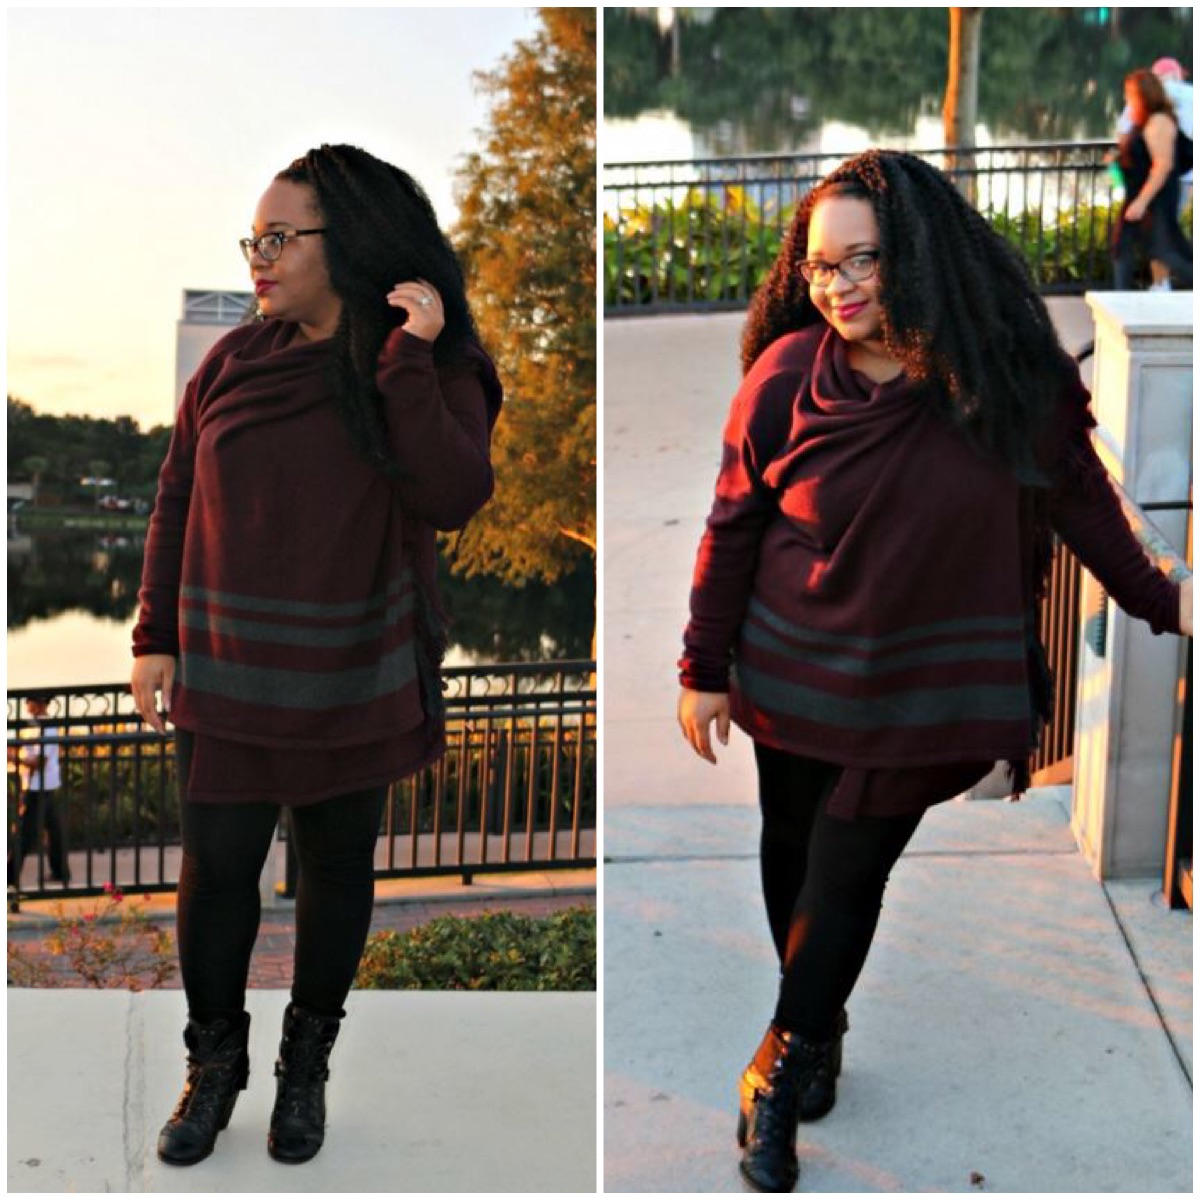 Sweater Dress with Leggings Outfits (15 ideas & outfits)